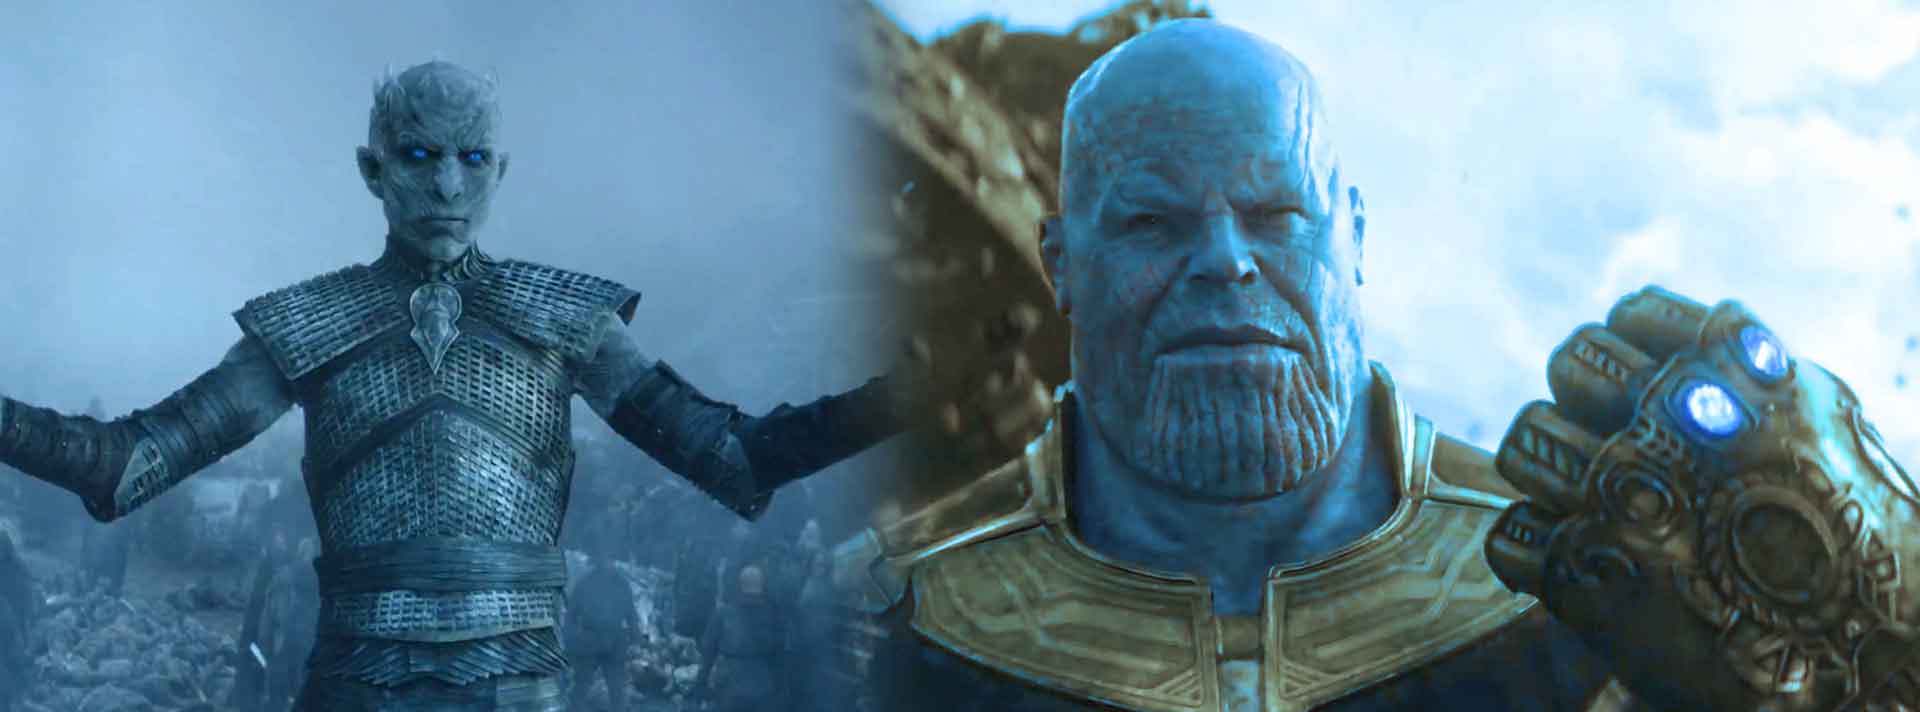 The Night King - Game of Thrones - Thanos - Avengers Infinity War